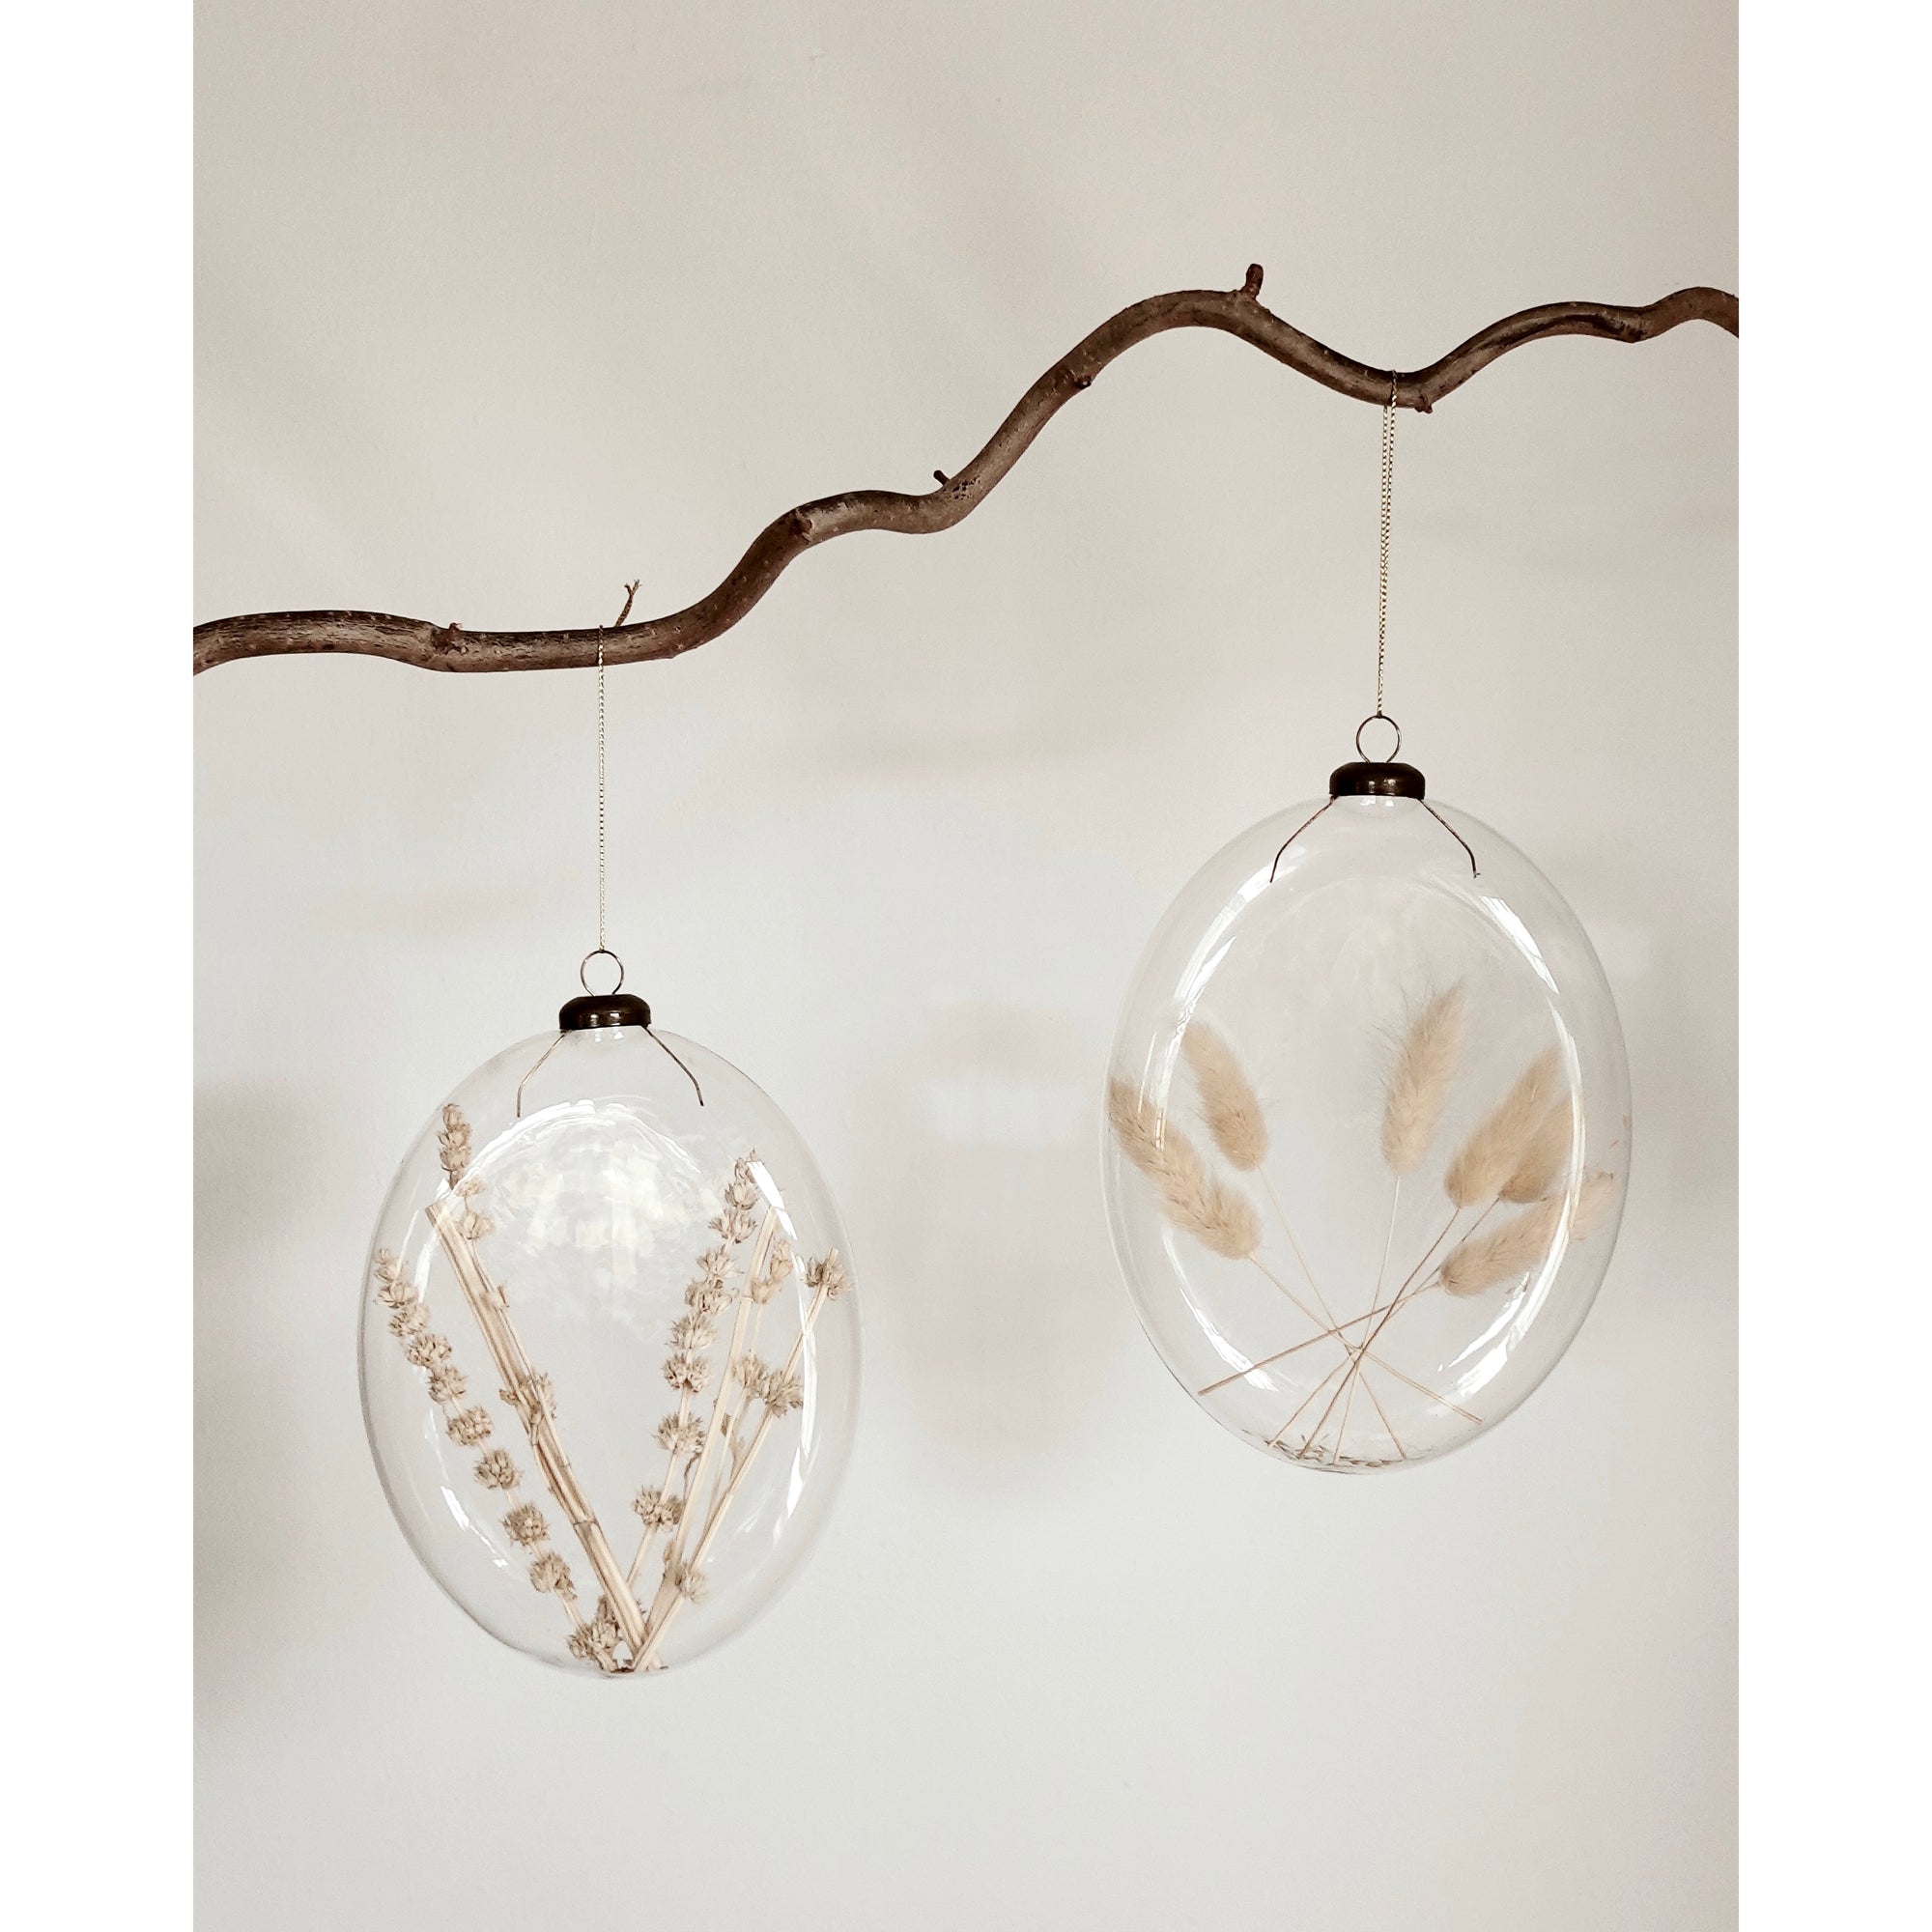 Four XL Dried Bloom Glass Baubles | Natural